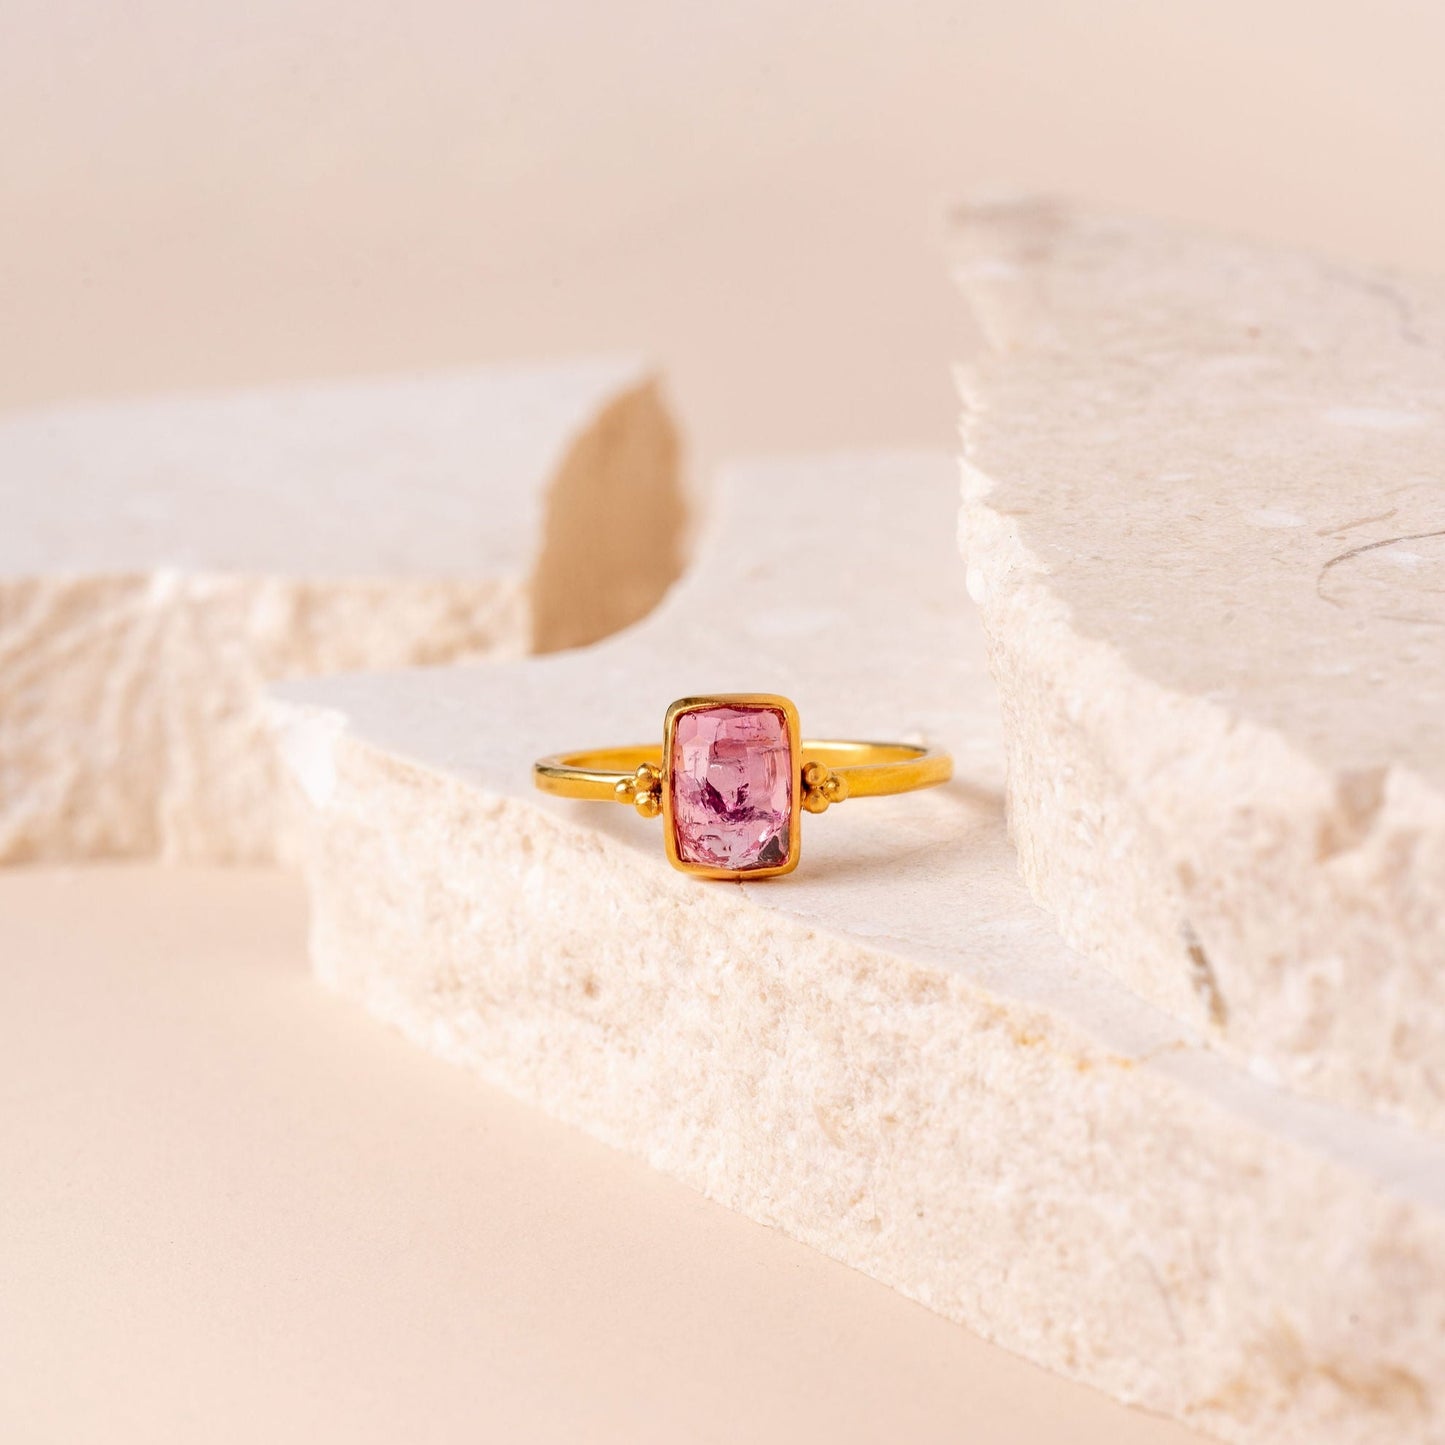 Artisanal ring design showcasing a stunning hand-cut pink tourmaline with delicate granulation.